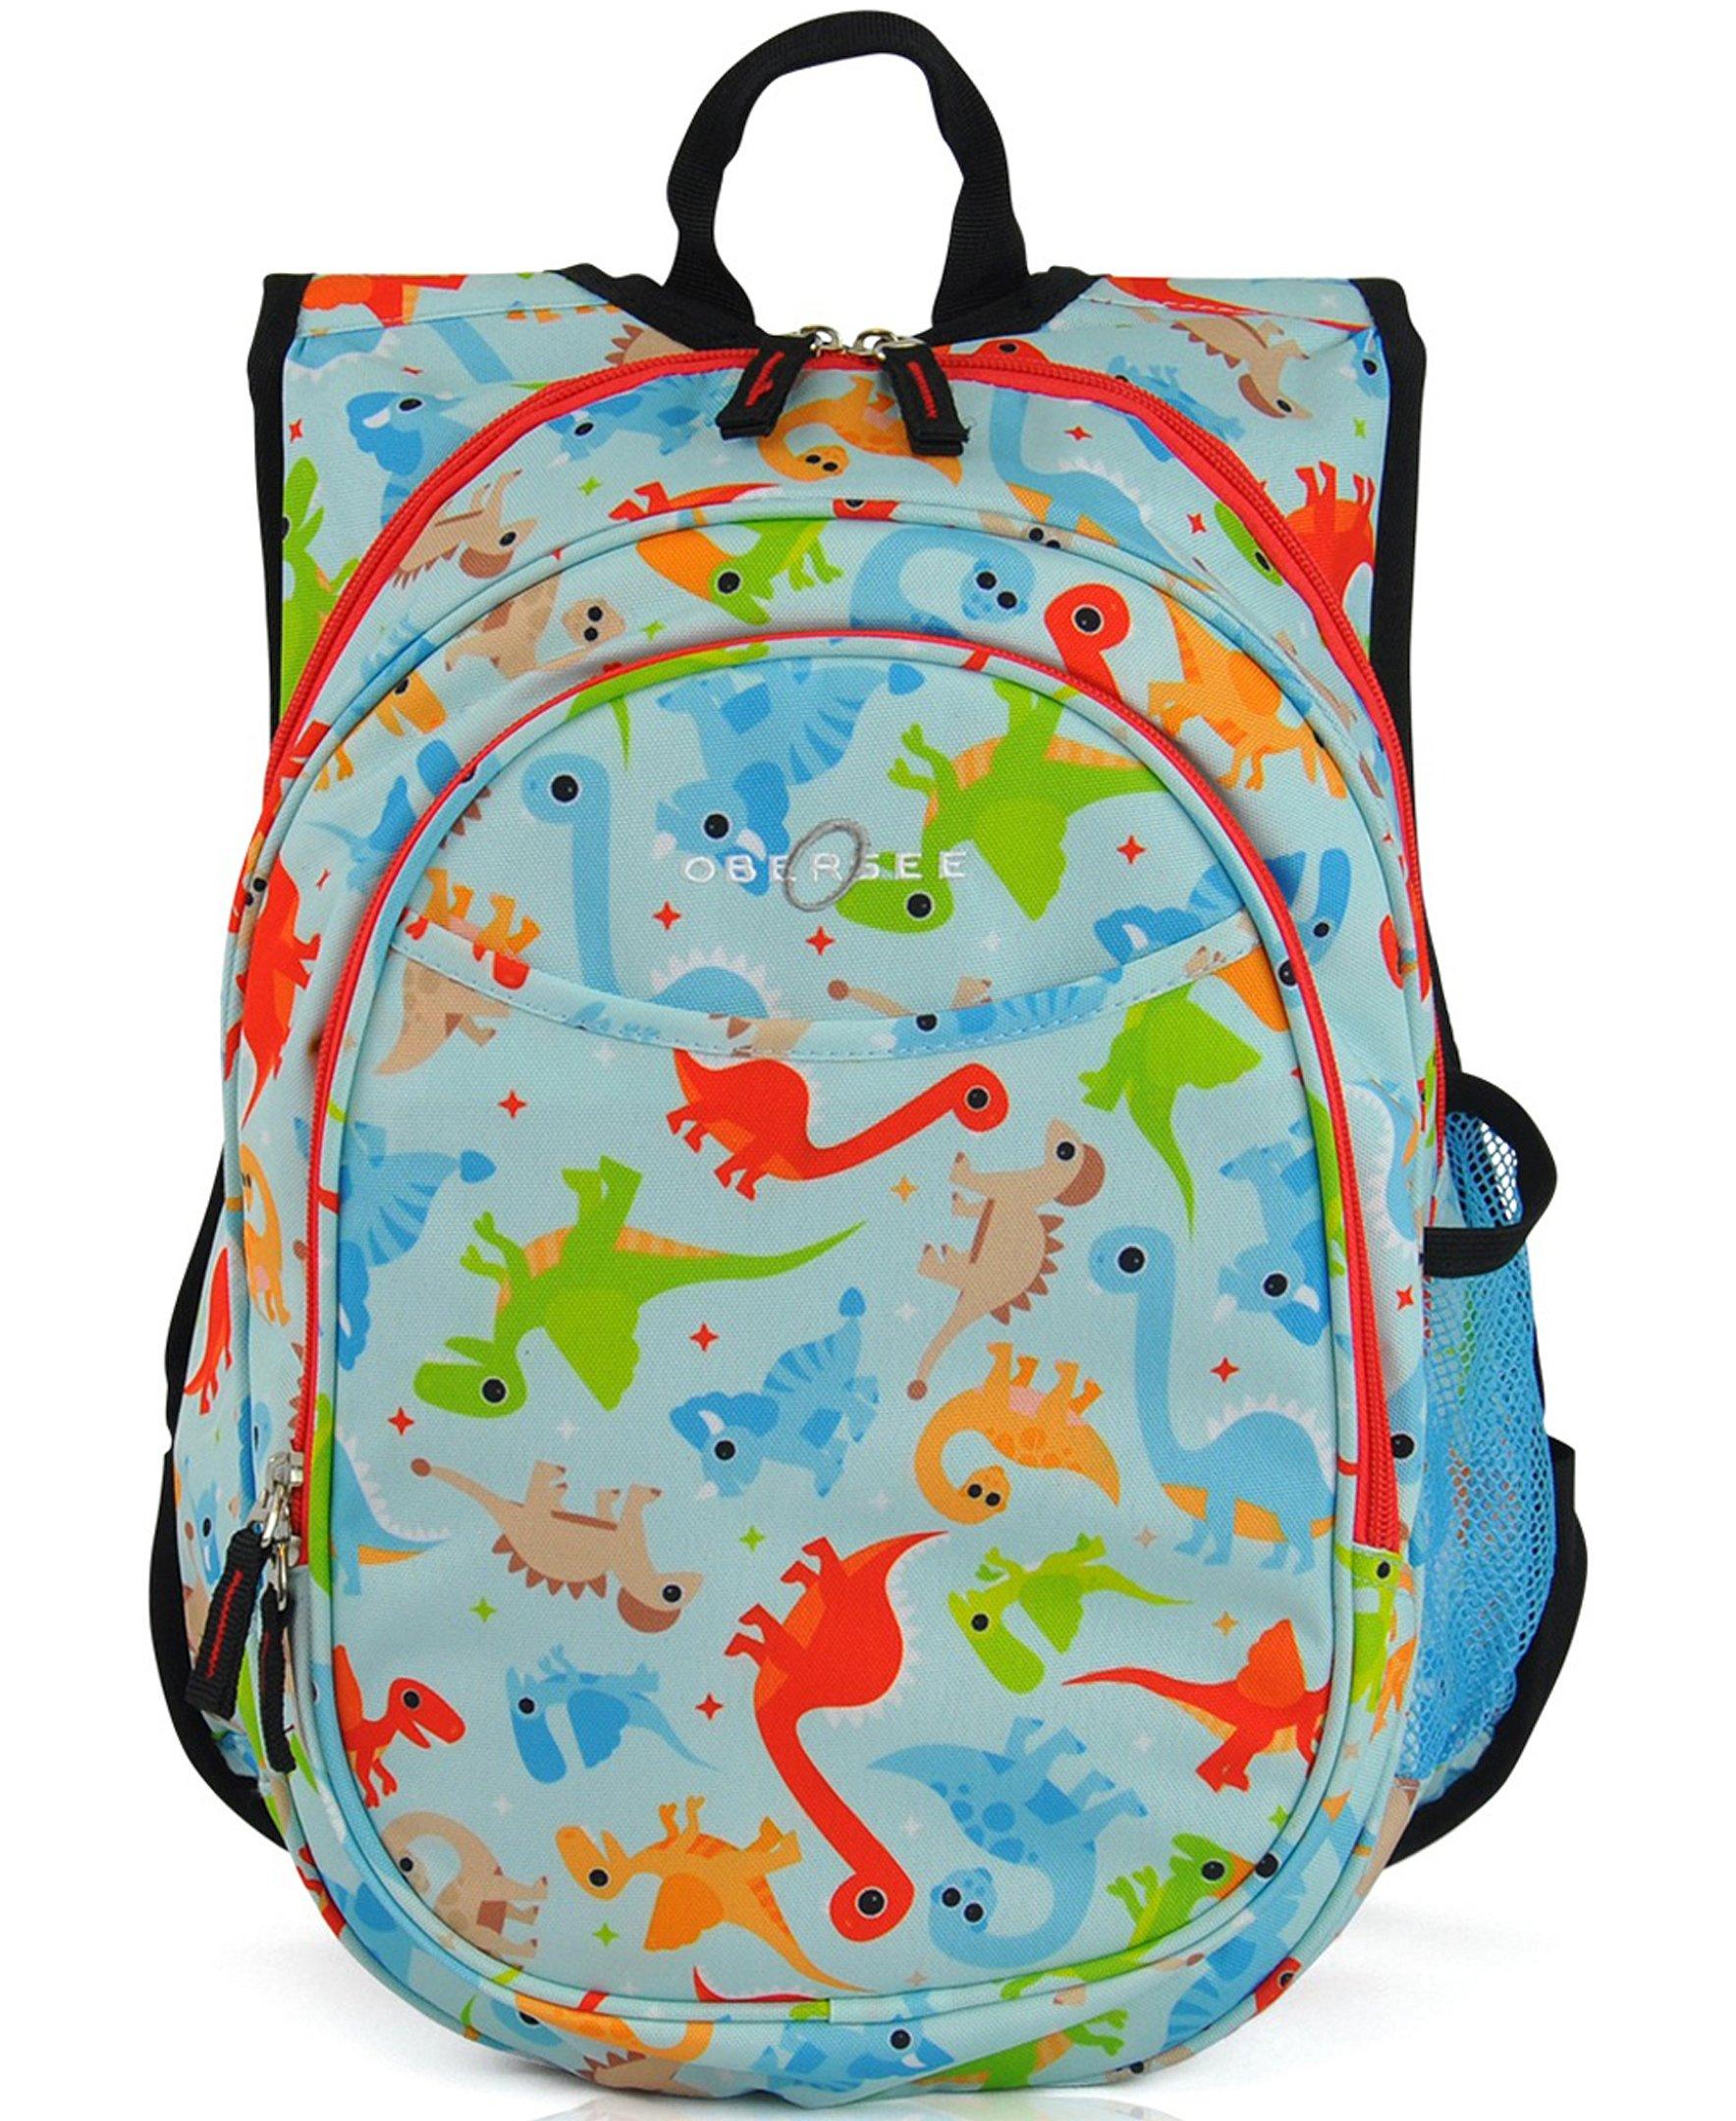 O3KCBP018 Obersee Mini Preschool All-in-One Backpack for Toddlers and Kids with integrated Insulated Cooler | Dinosaur - image 1 of 5